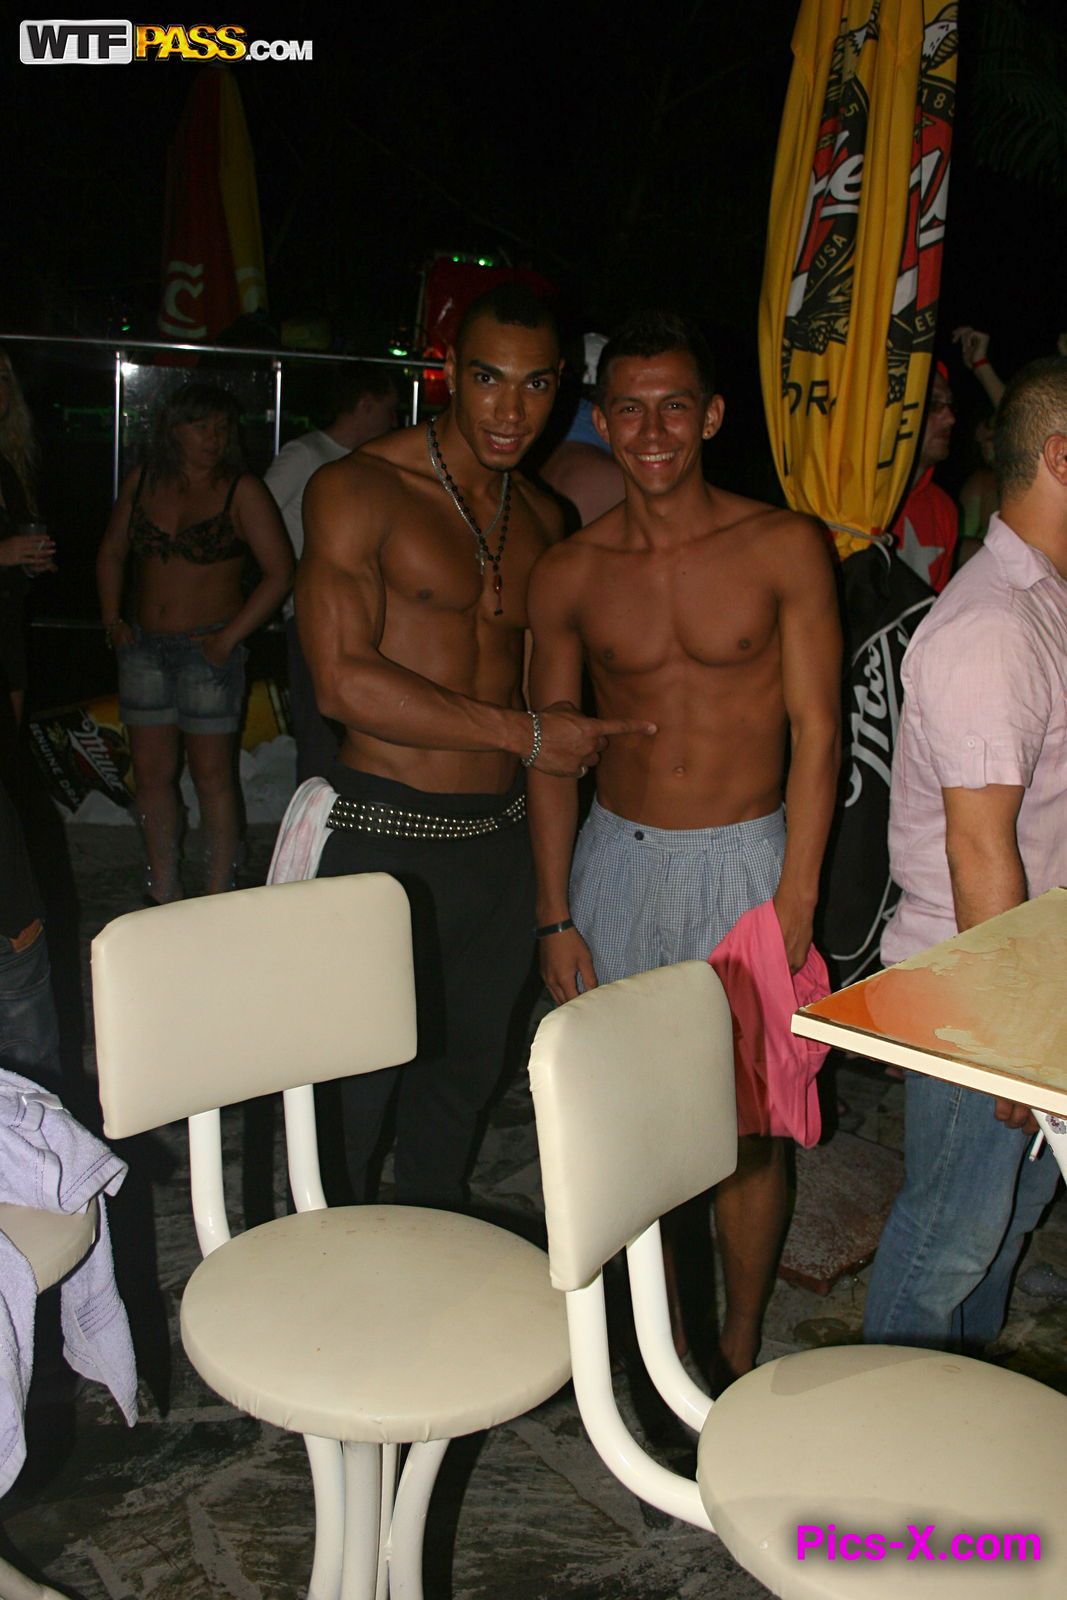 Wild vacation sex in Turkey: Day 4 - Crazy hotel sex games after night club, part 3 - Porn Weekends - Image 58